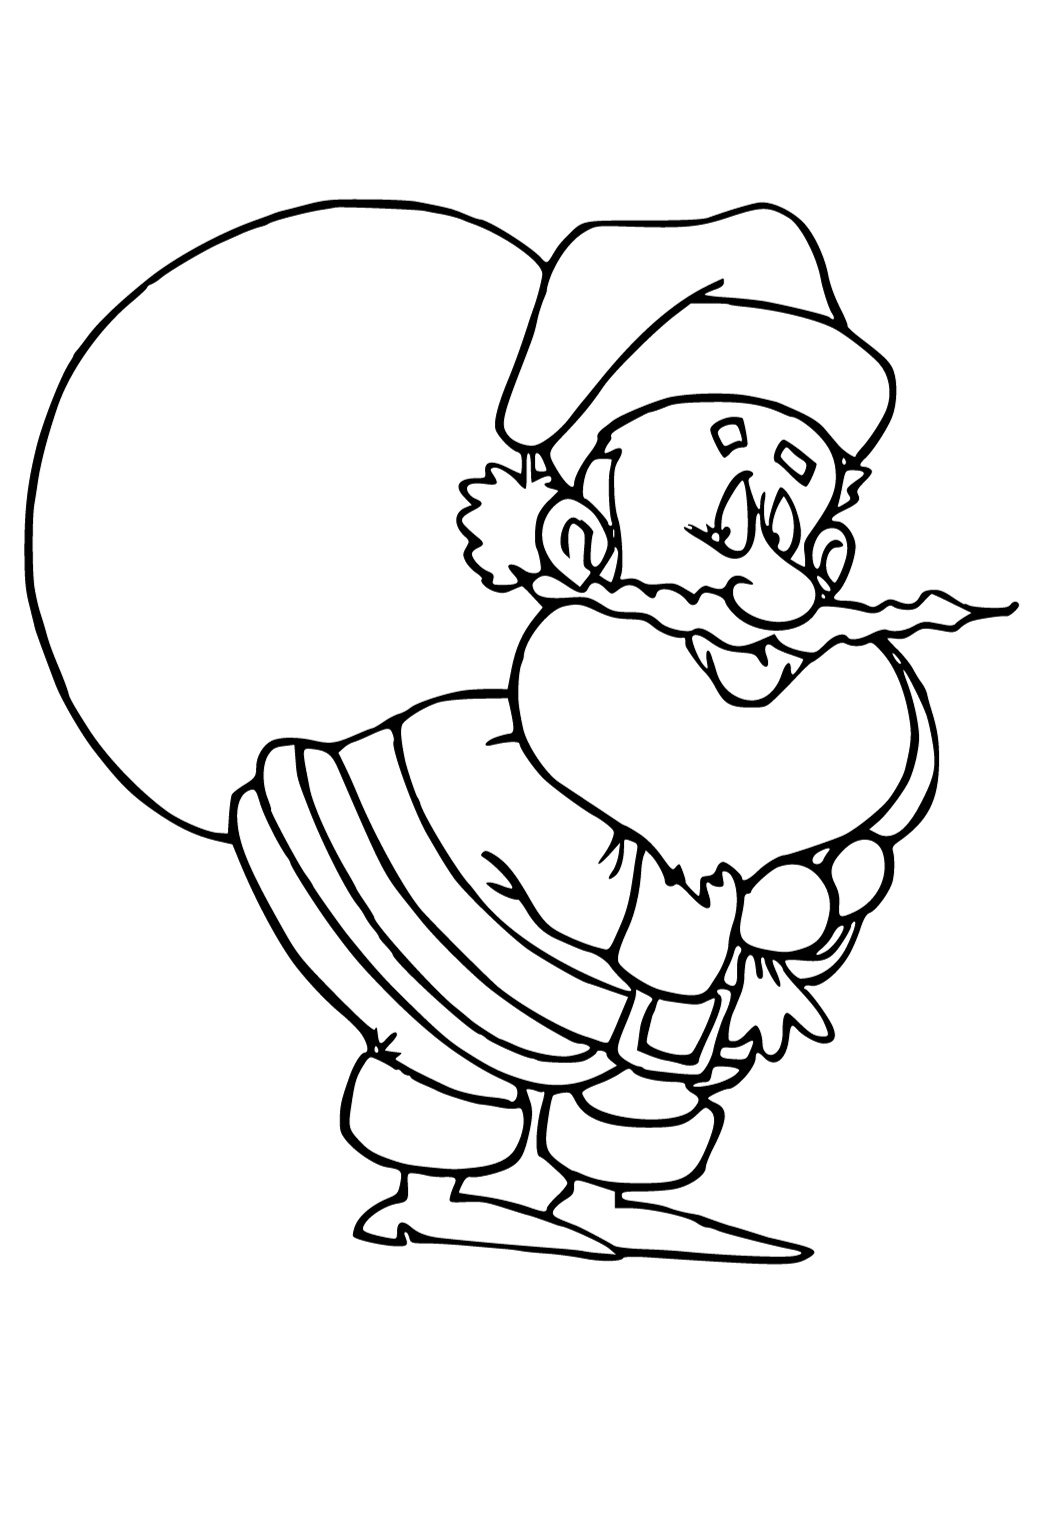 Free printable christmas mustache coloring page for adults and kids